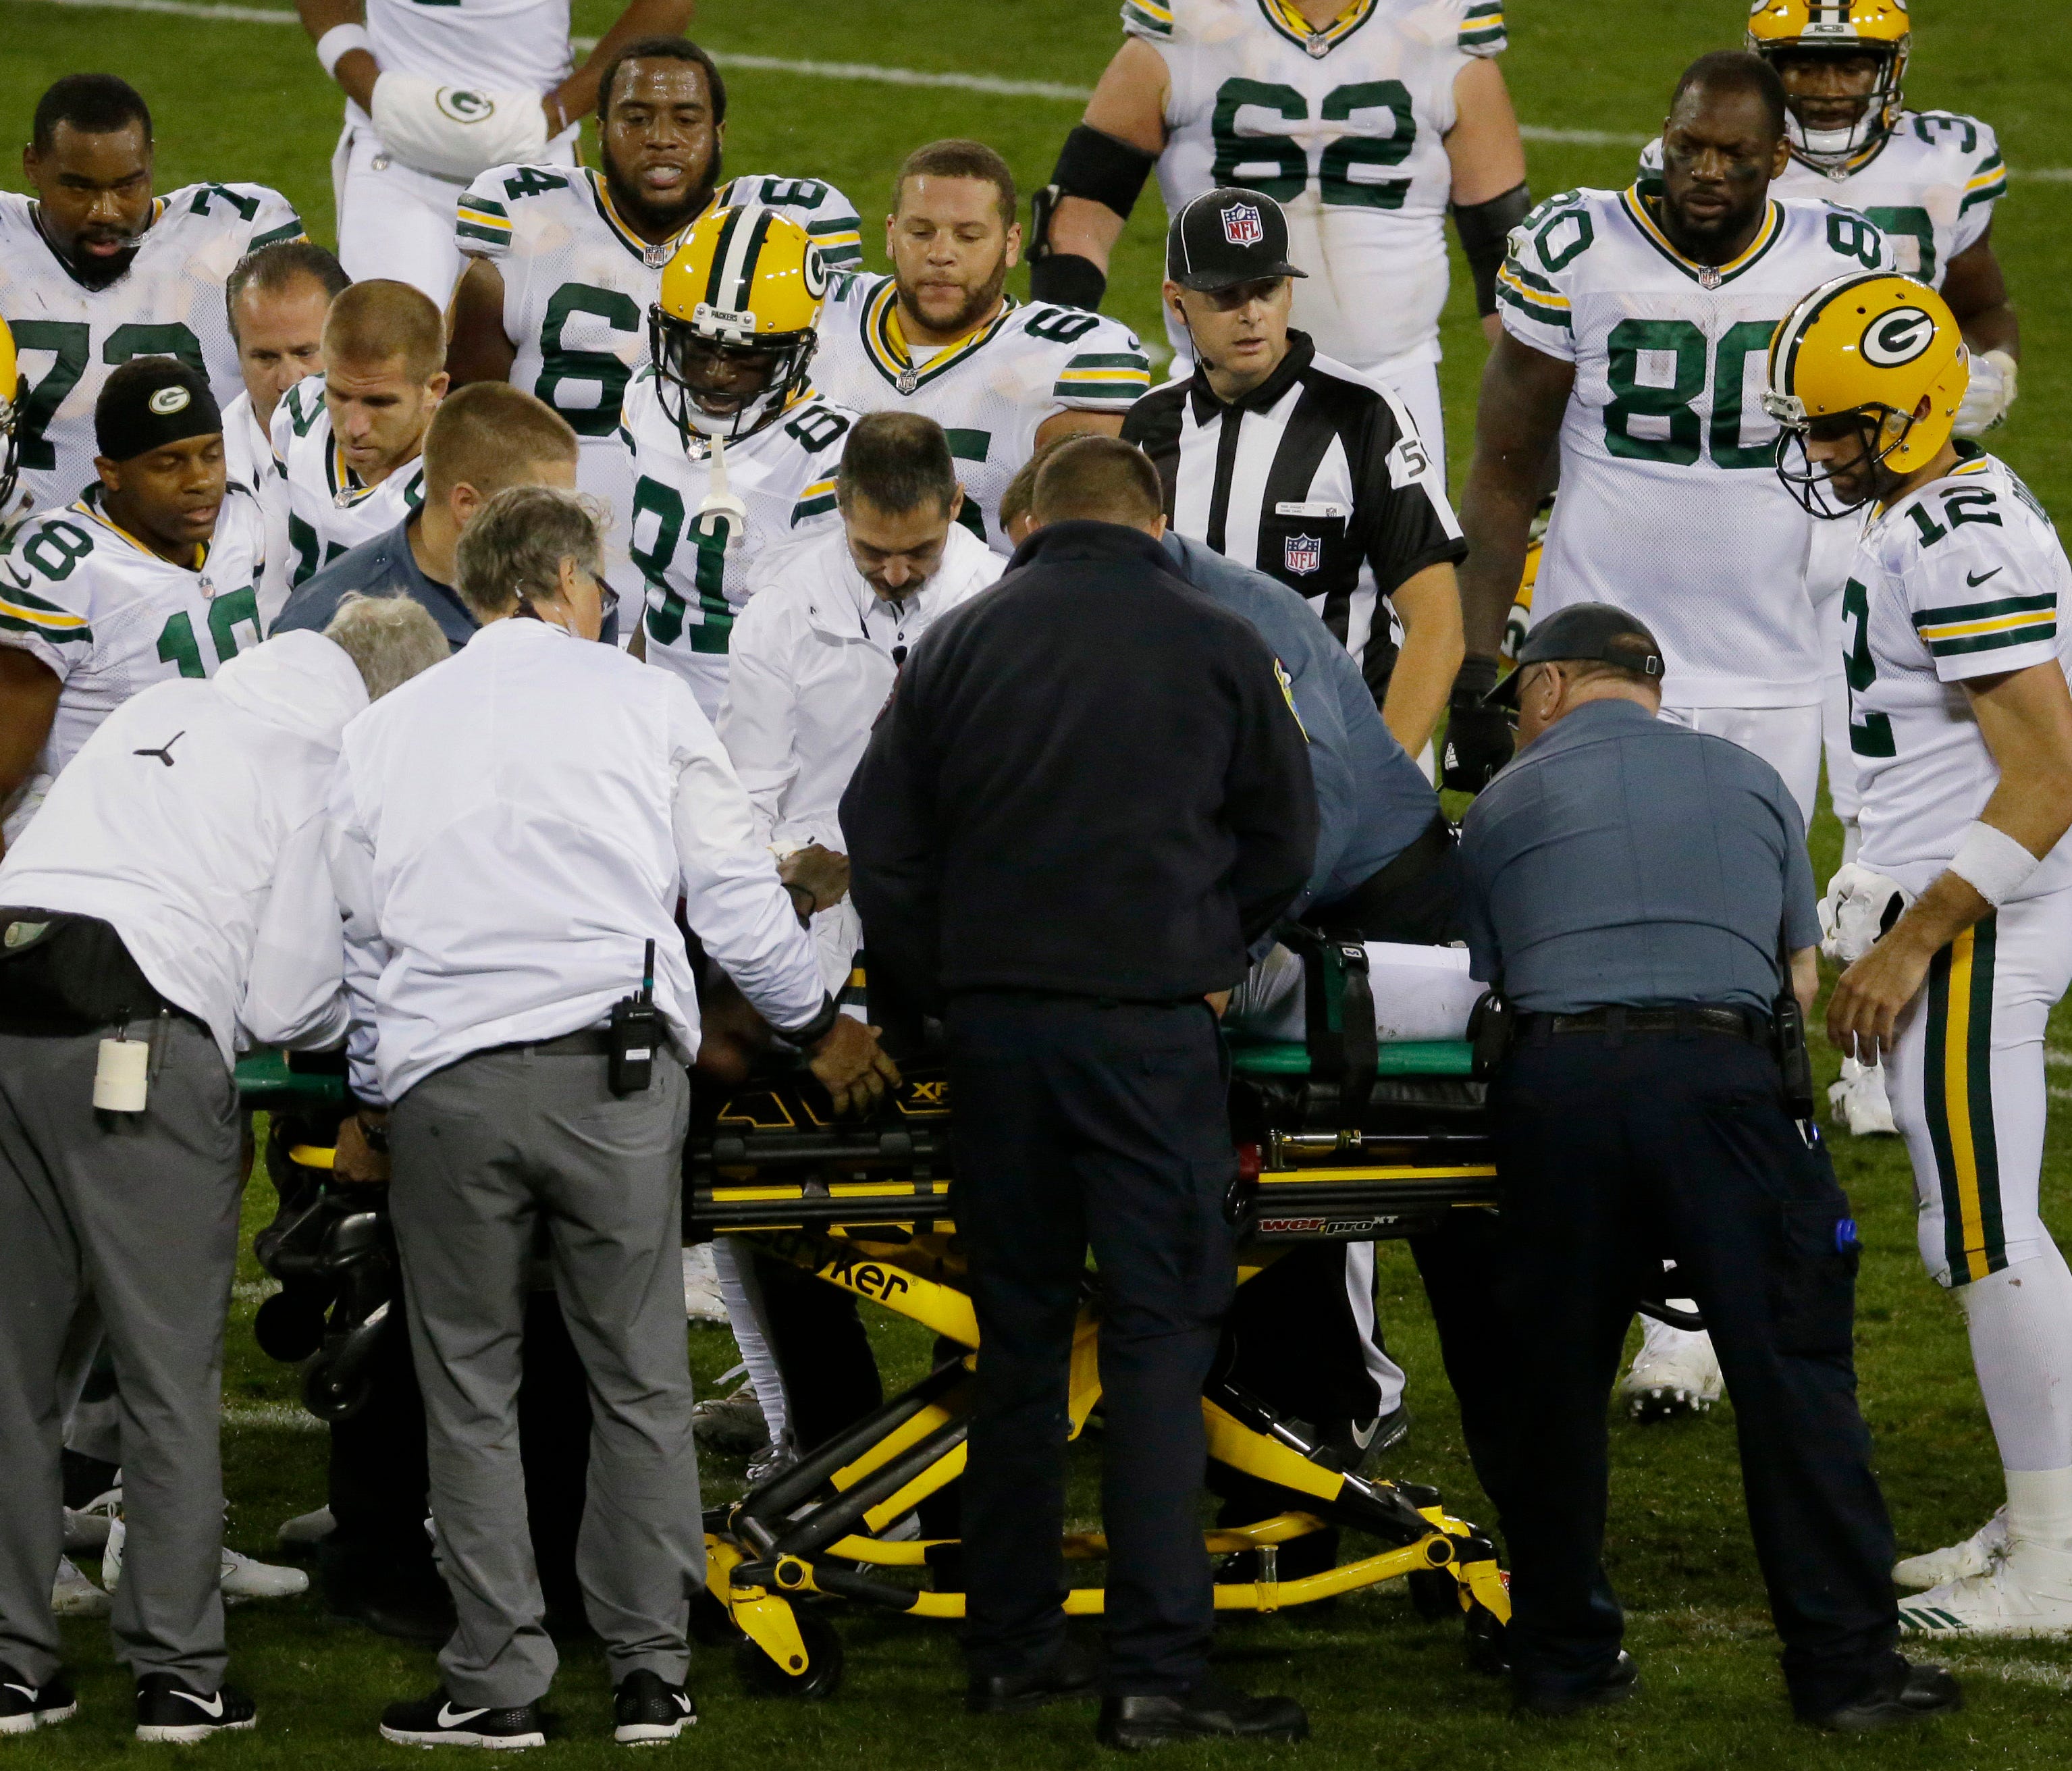 Teammates gather around Green Bay Packers wide receiver Davante Adams as he is taken from the field on a stretcher after being drilled by Chicago Bears inside linebacker Danny Trevathan  during the third  quarter at Lambeau Field.